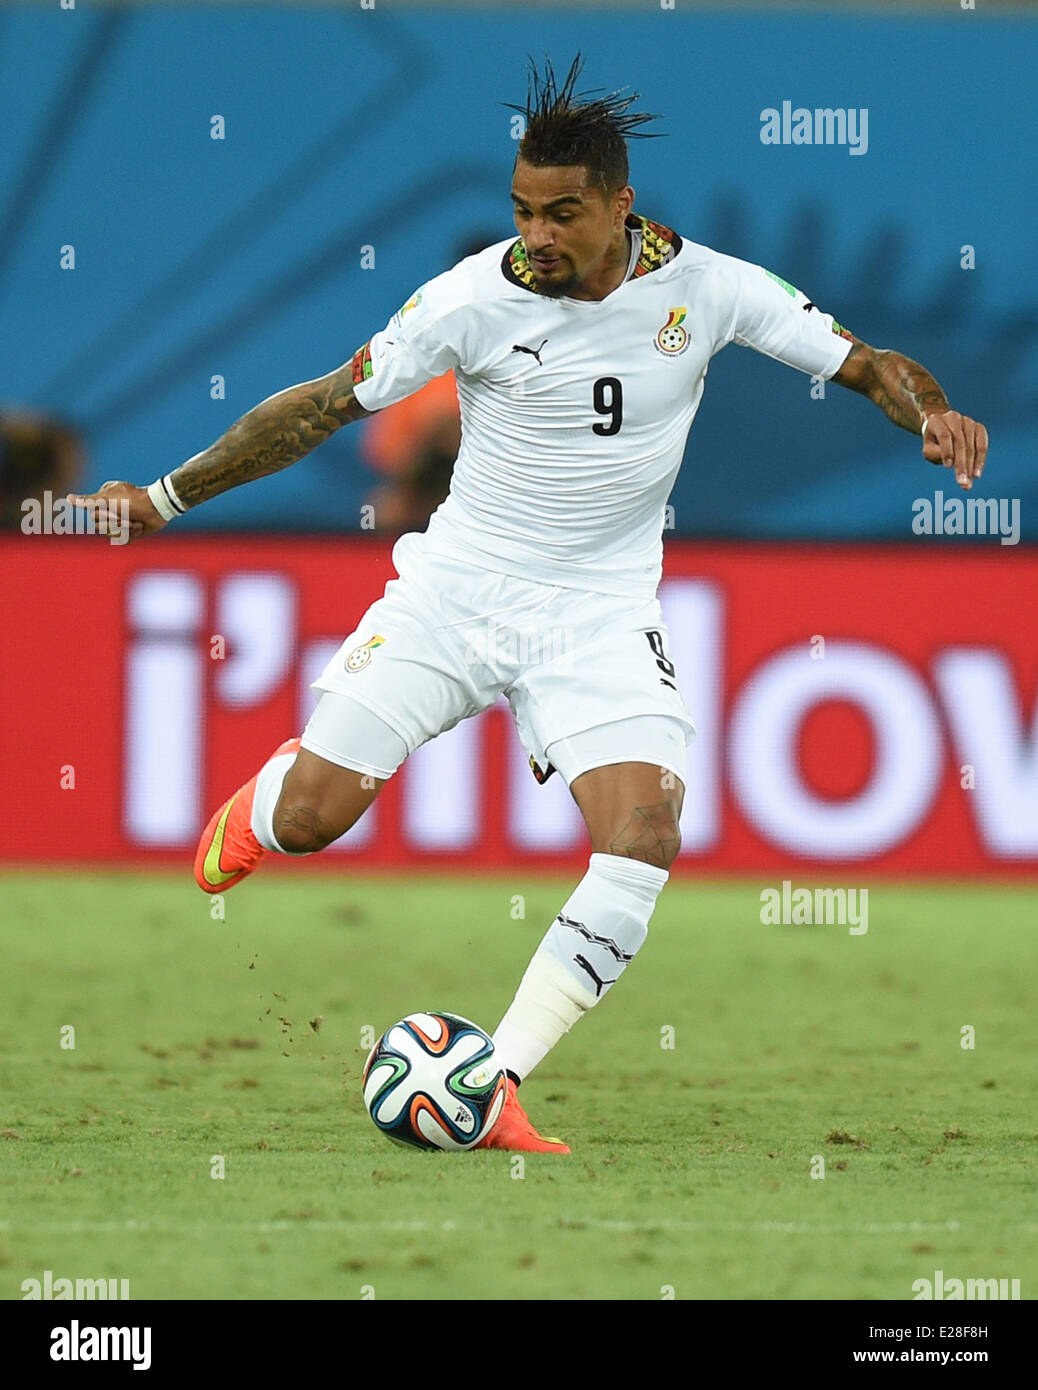 Natal, Brazil. 16th June, 2014. Kevin Prince Boateng of Ghana in action during the FIFA World Cup 2014 group G preliminary round match between Ghana and the USA at the Estadio Arena das Dunas Stadium in Natal, Brazil, 16 June 2014. Credit:  dpa picture alliance/Alamy Live News Stock Photo